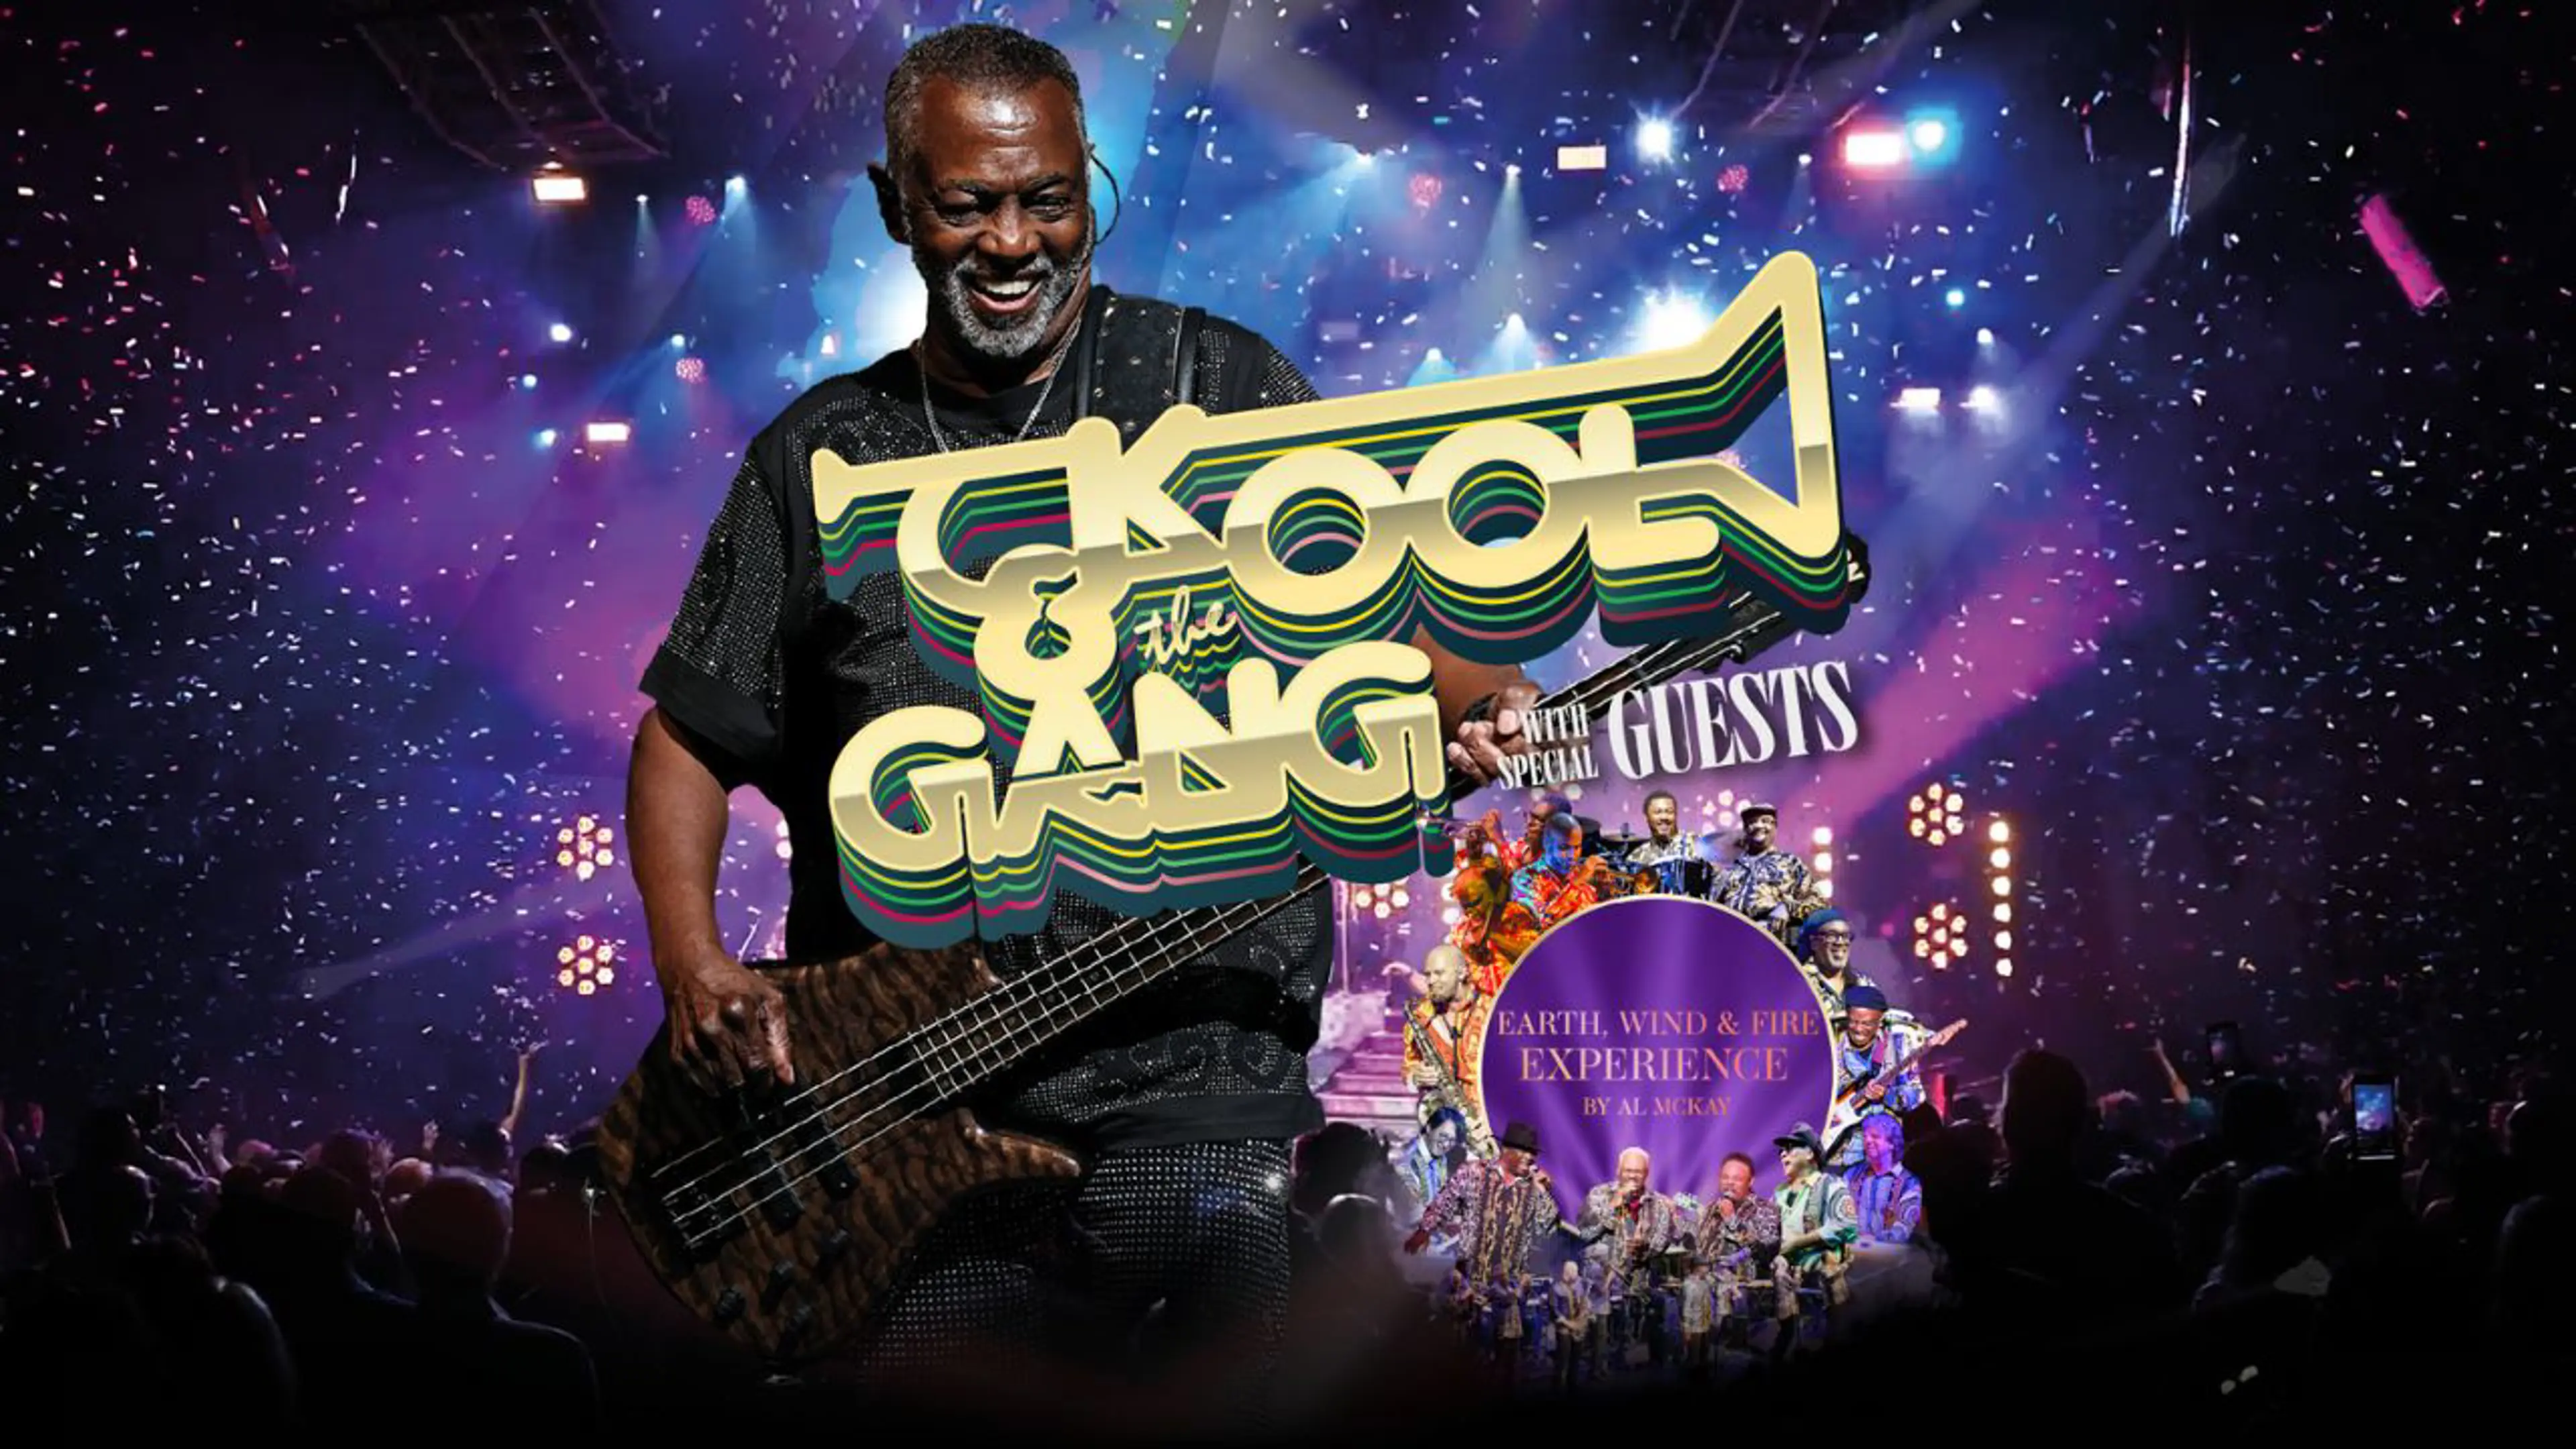 Kool & the Gang with special guests, Earth, Wind & Fire Experience by Al McKay